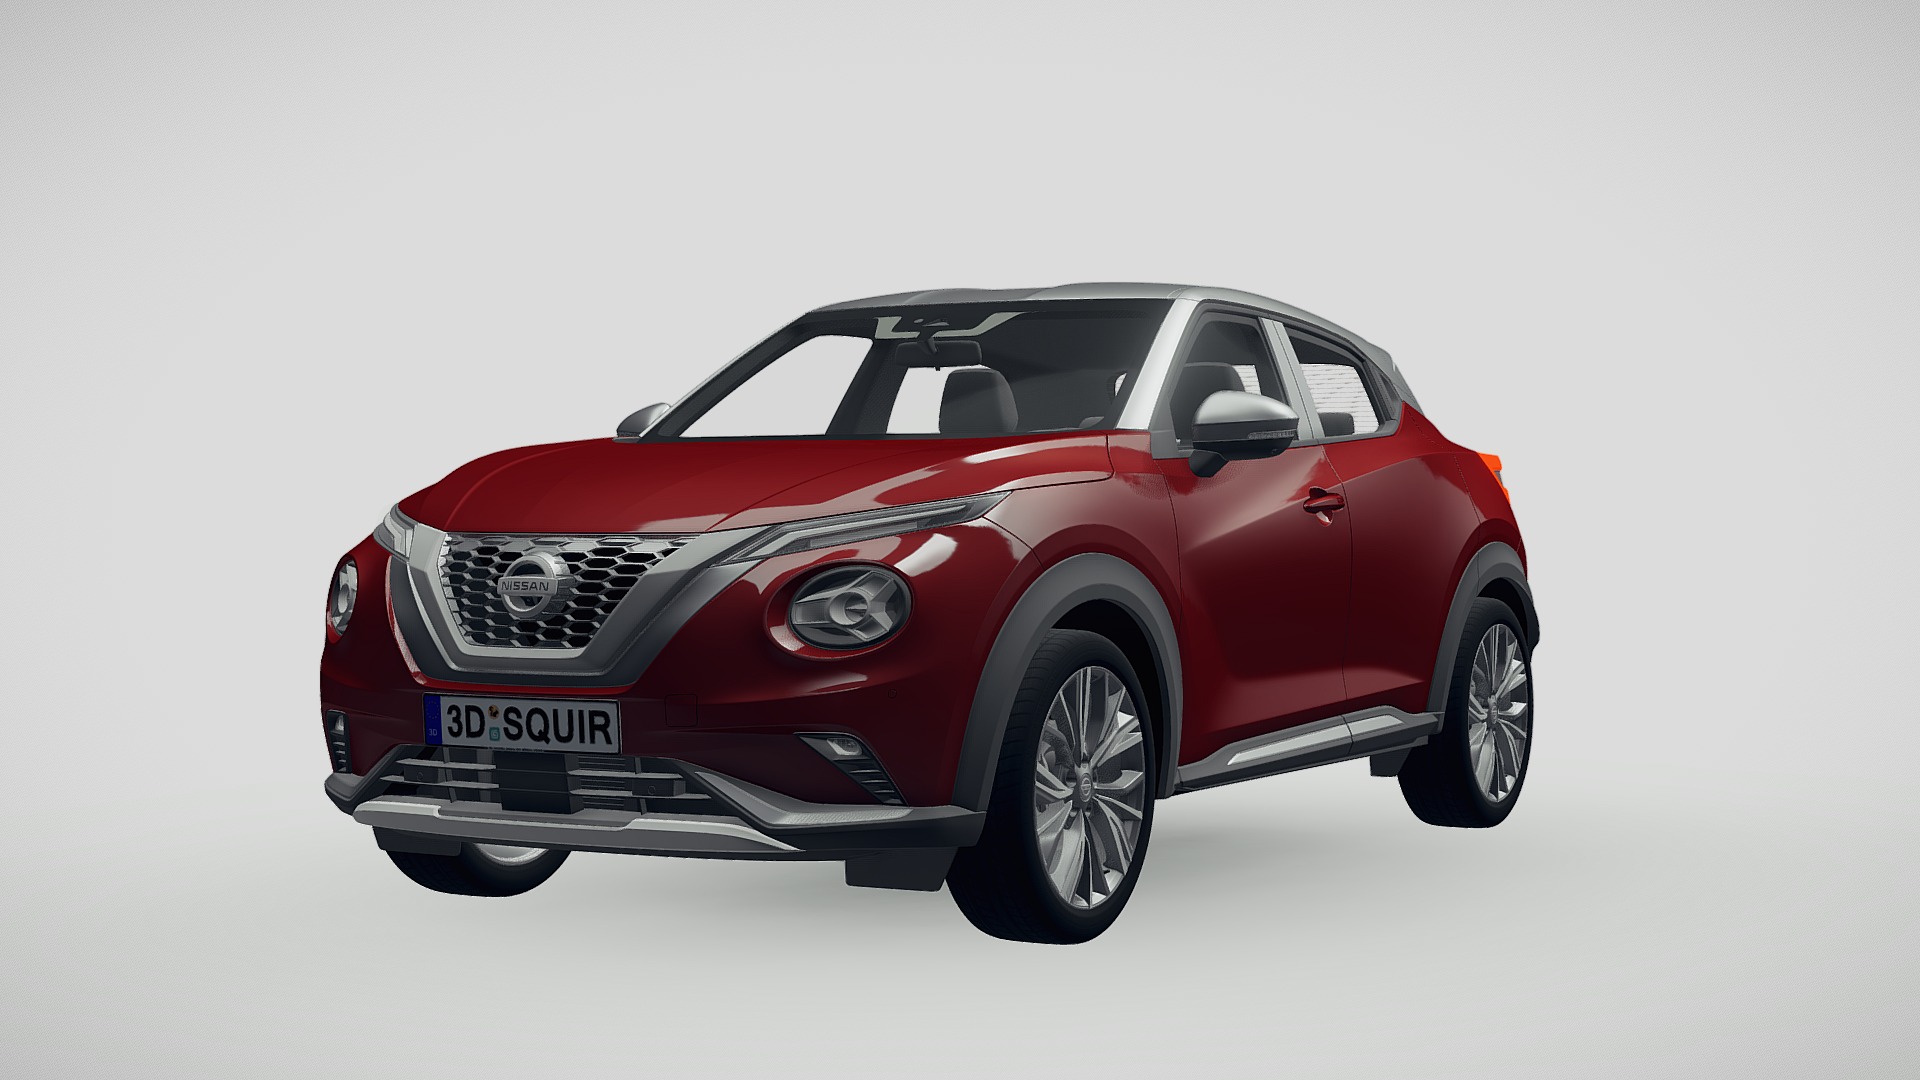 3D model Nissan Juke 2020 - This is a 3D model of the Nissan Juke 2020. The 3D model is about a red car with a white background.